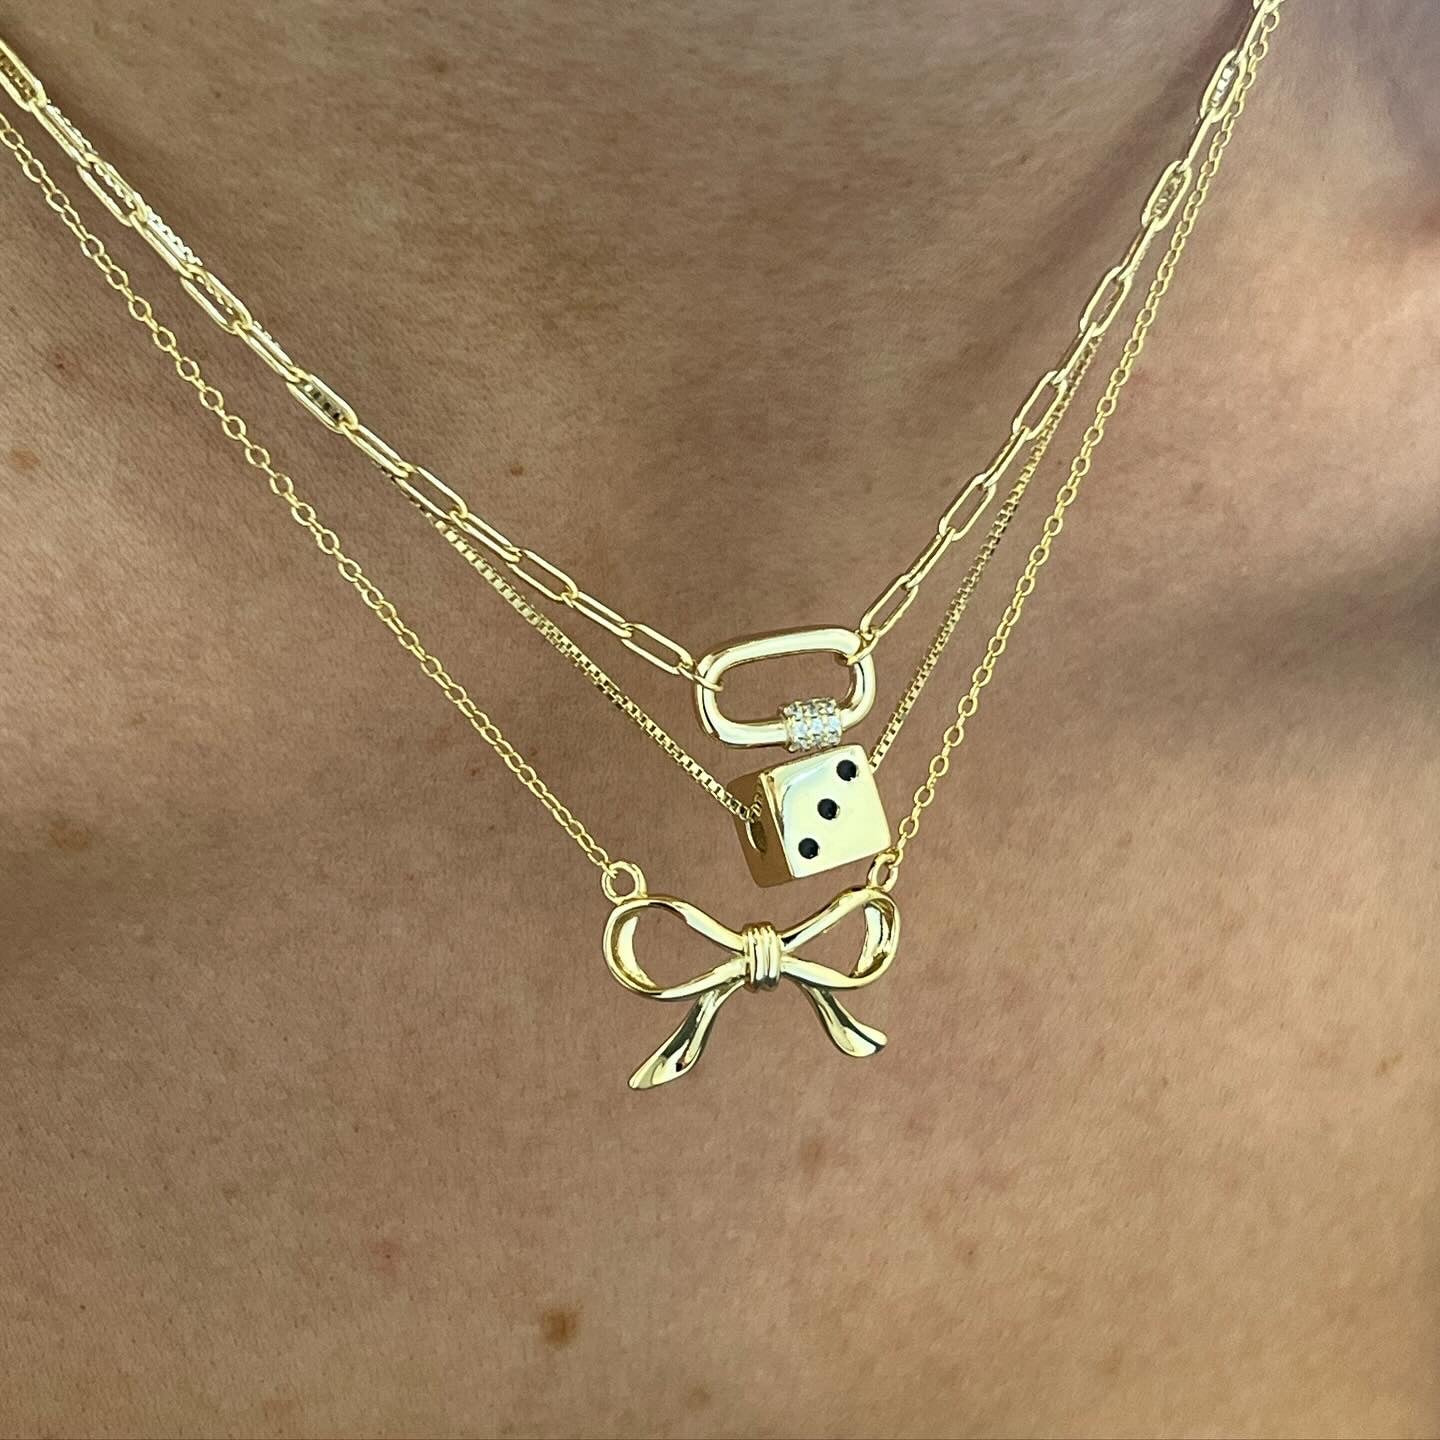 Gold Fine Chain Bow Necklace